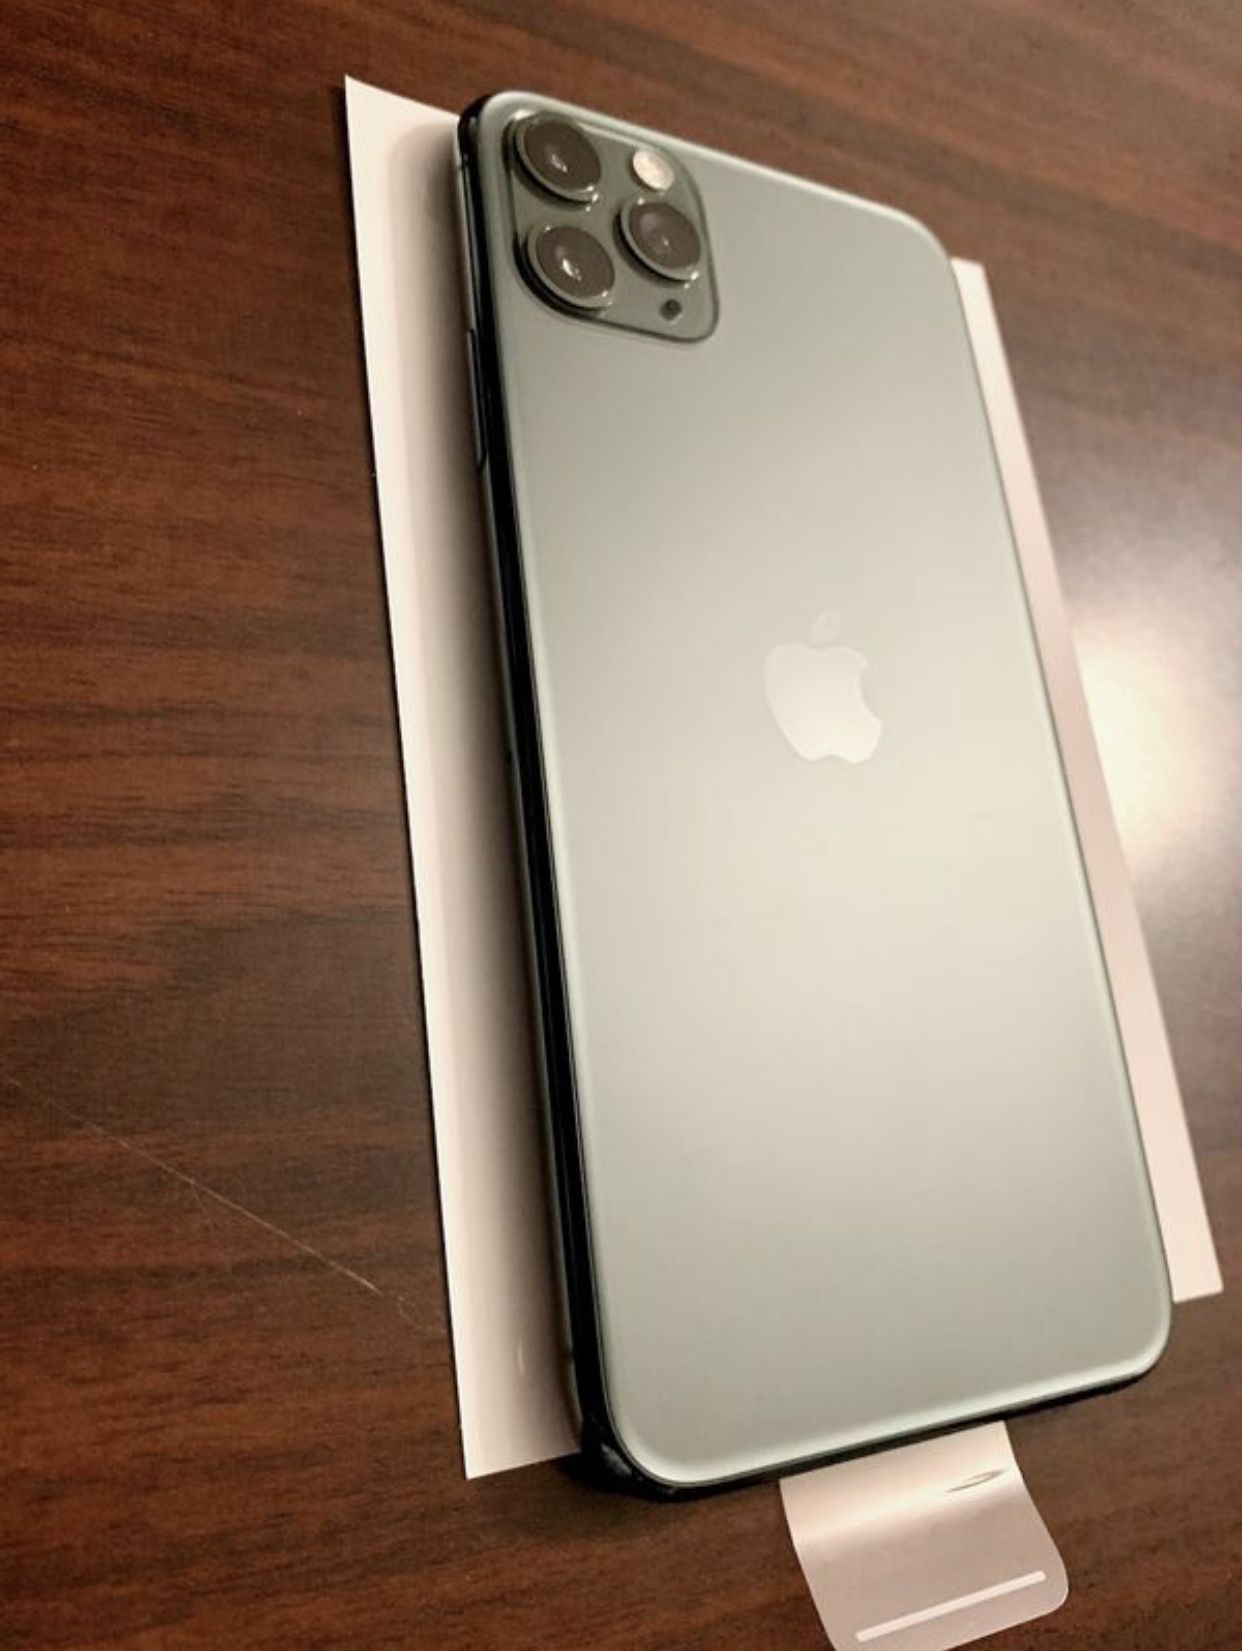 iPhone 11 Pro Max 256GB Midnight Green Unlocked Like New. NAME YOUR PRICE